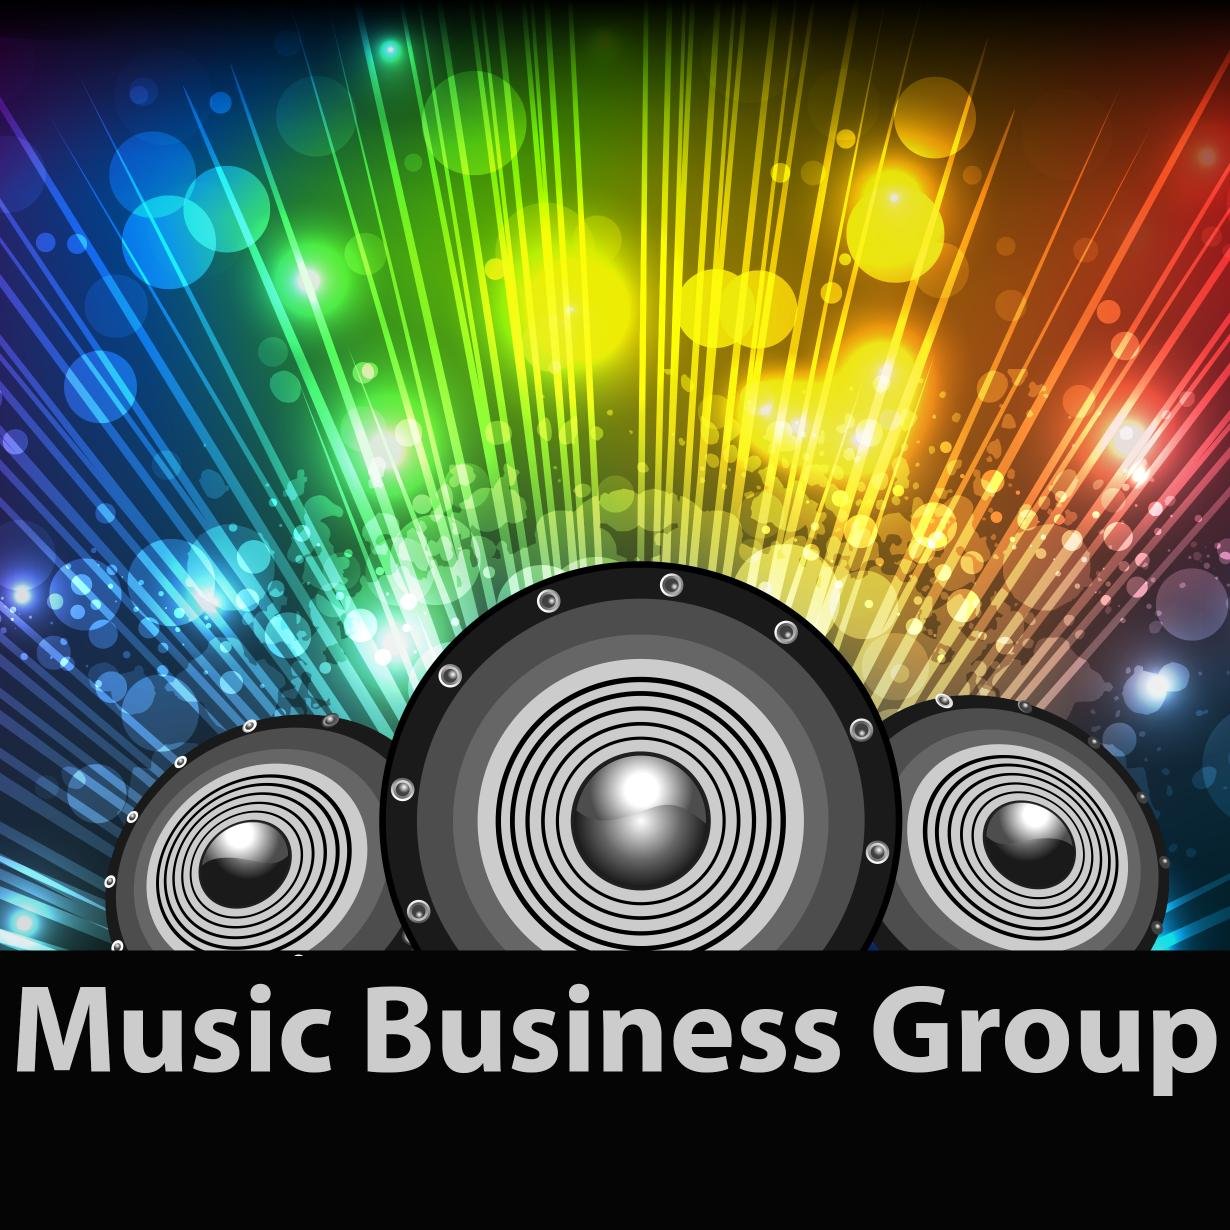 This free educational Music Business Group is for songwriters who want to make a business out of their songwriting.